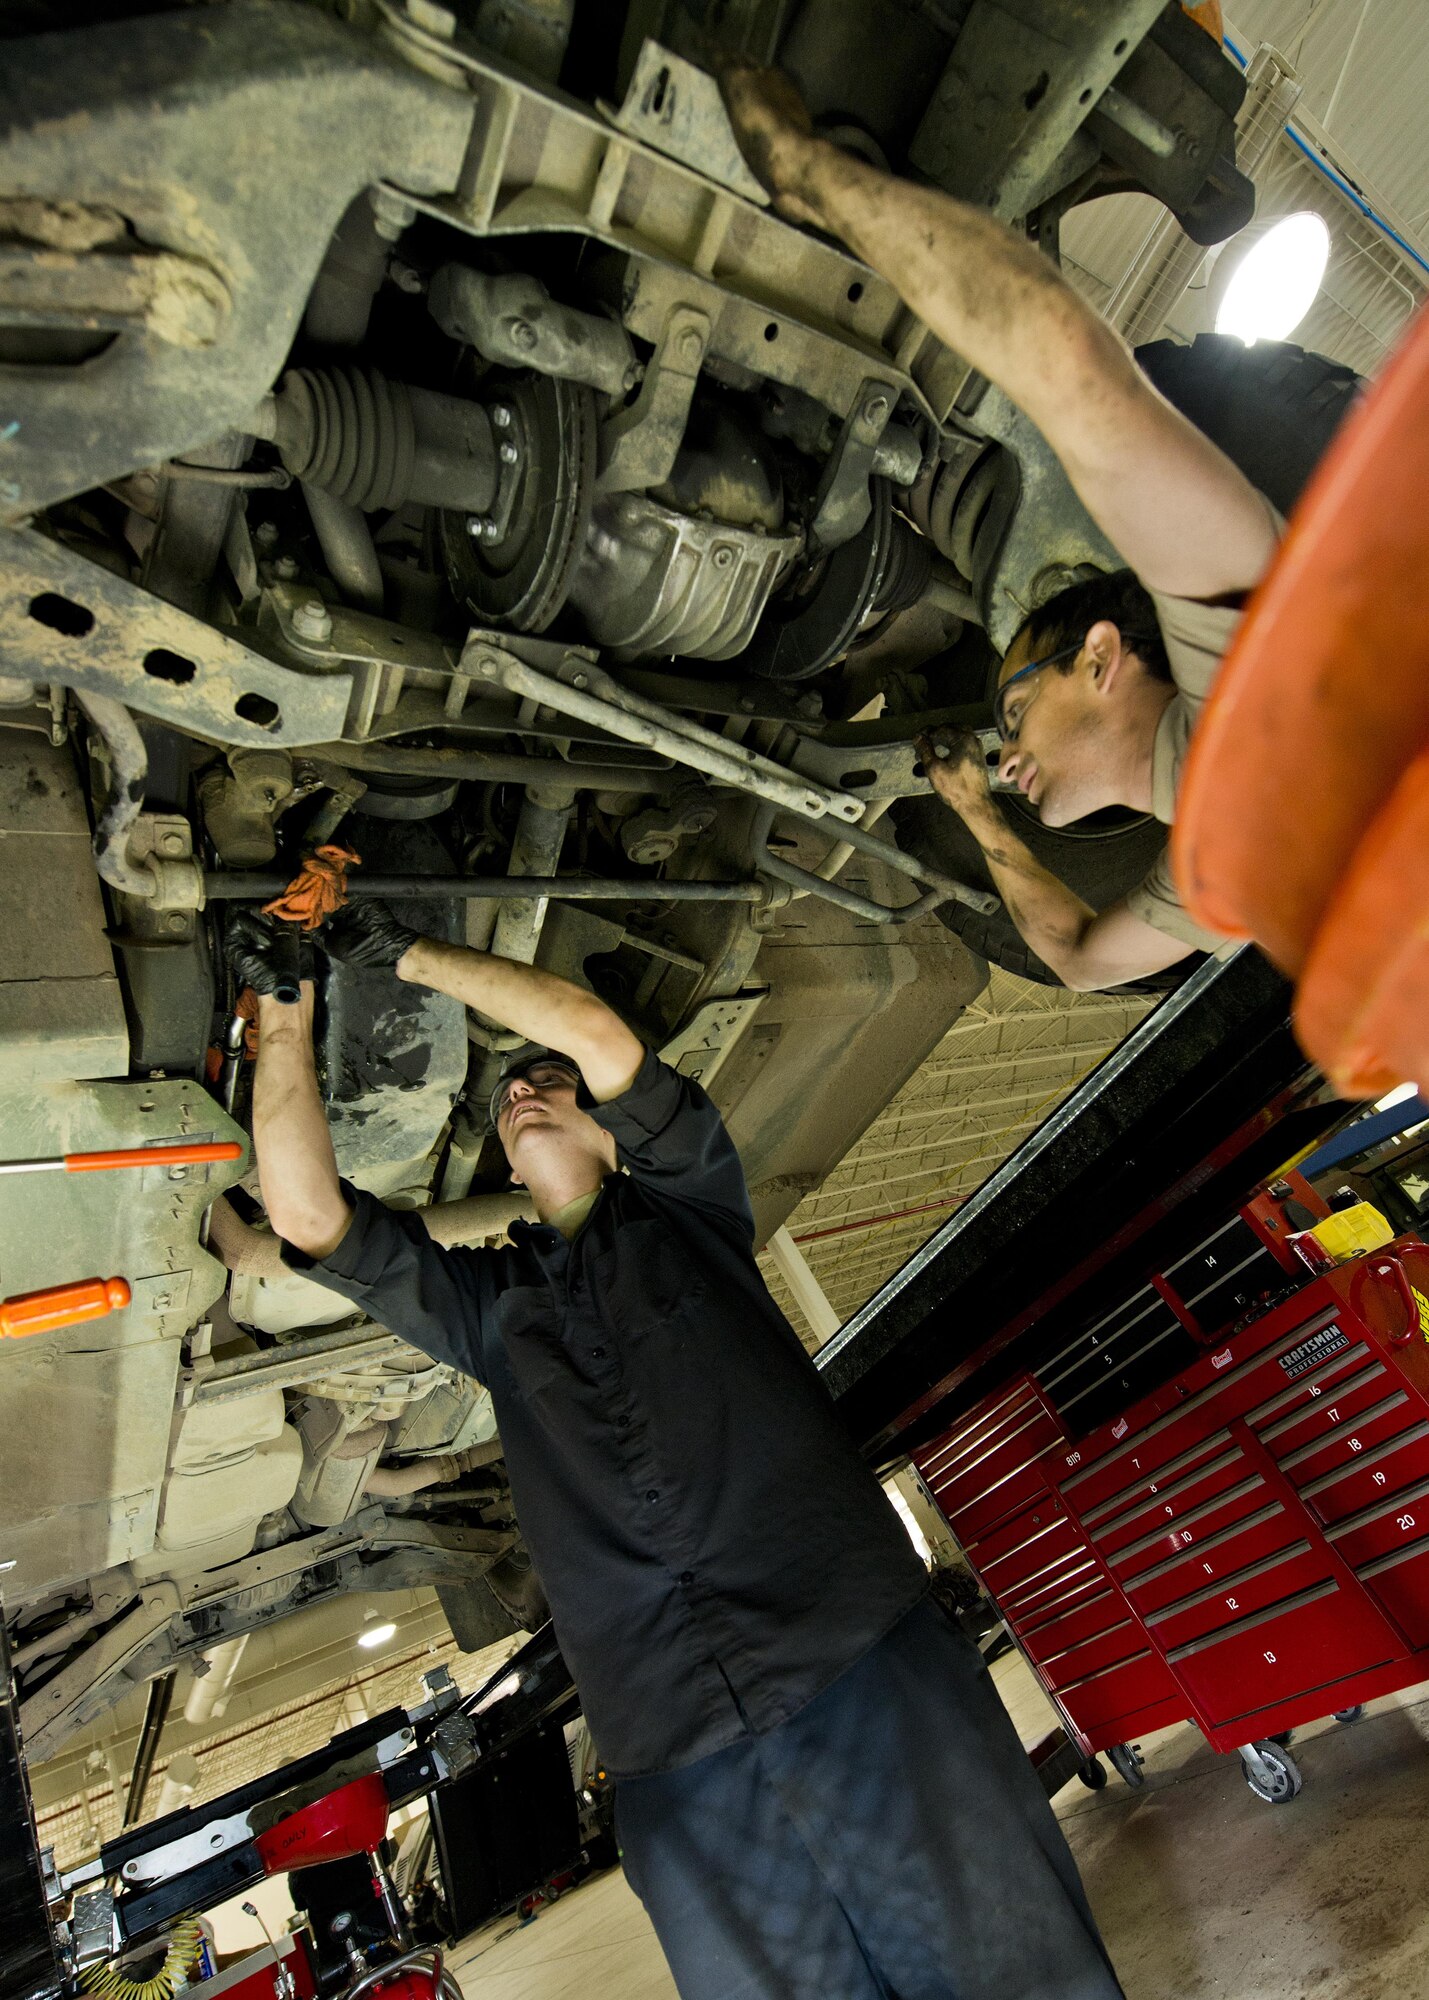 Senior Airman Logan Rivelli (left) and Staff Sgt. Adam Garcia, 5th Logistics Readiness Squadron vehicle maintenance technicians, inspect the underside of a Humvee in the Defender Dome at Minot Air Force Base, N.D., July 28, 2016. Airmen from the 5th LRS vehicle maintenance flight work to ensure that Team Minot stays mobile. (U.S. Air Force photos/Airman 1st Class J.T. Armstrong)